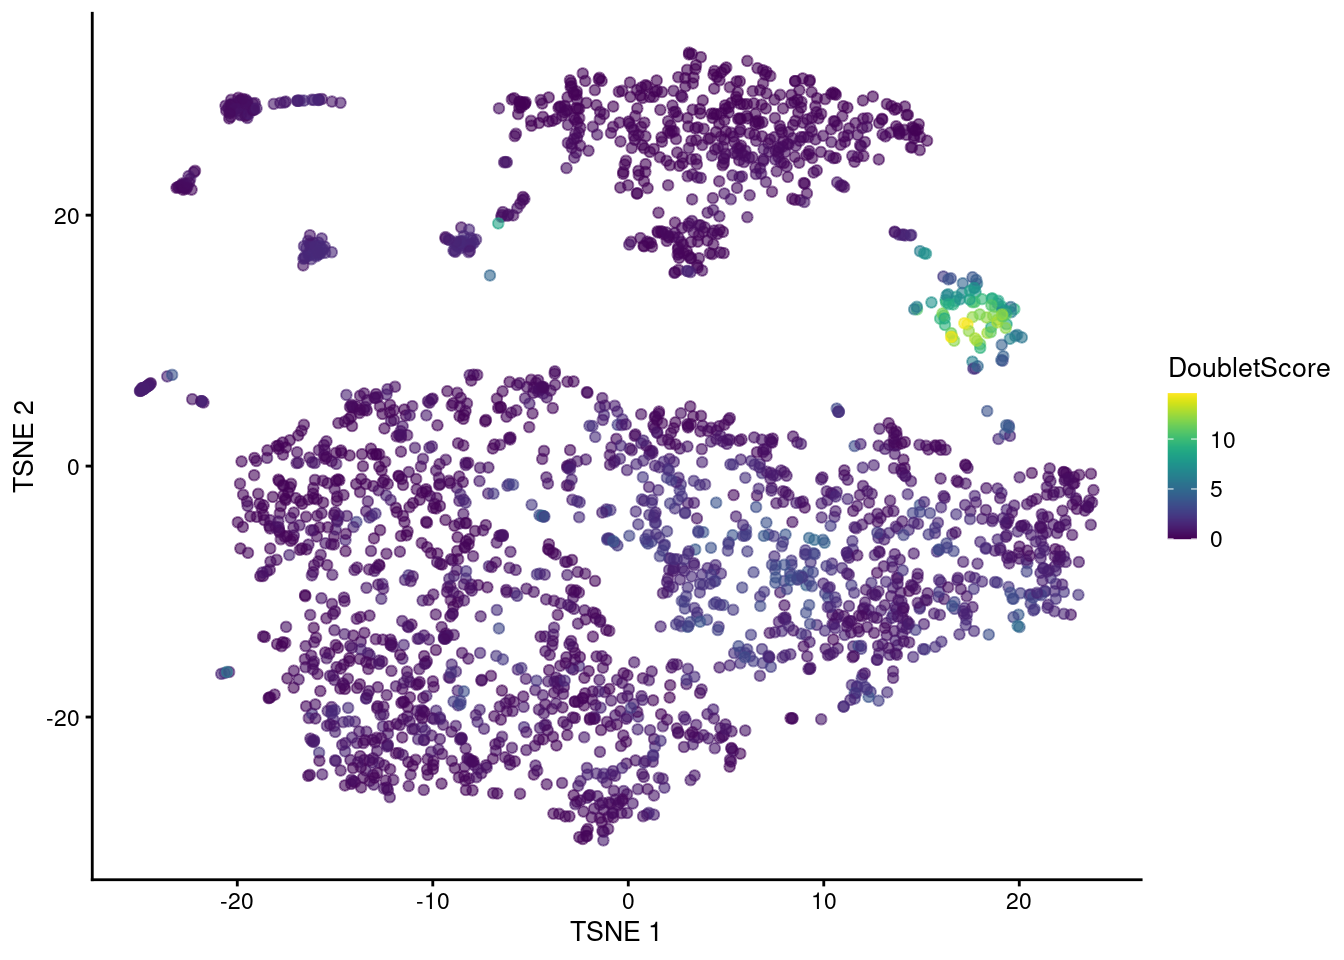 t-SNE plot of the mammary gland data set. Each point is a cell coloured according to its doublet density.